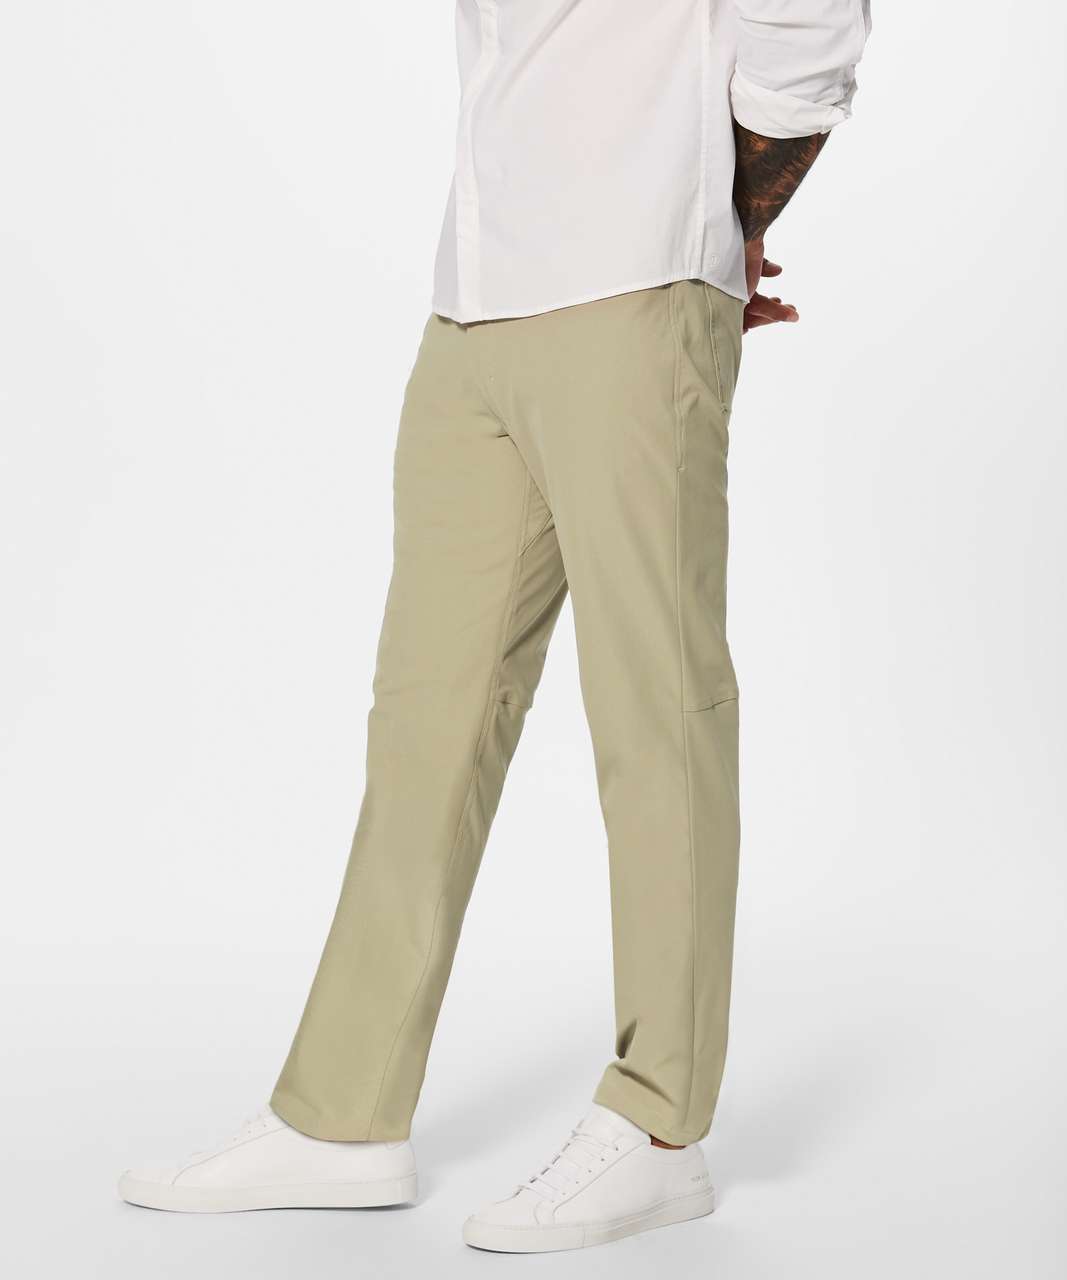 Lululemon ABC Pant Relaxed 34 Length WARPSTREME - TFSD (Tofino Sant) (33)  at  Men's Clothing store